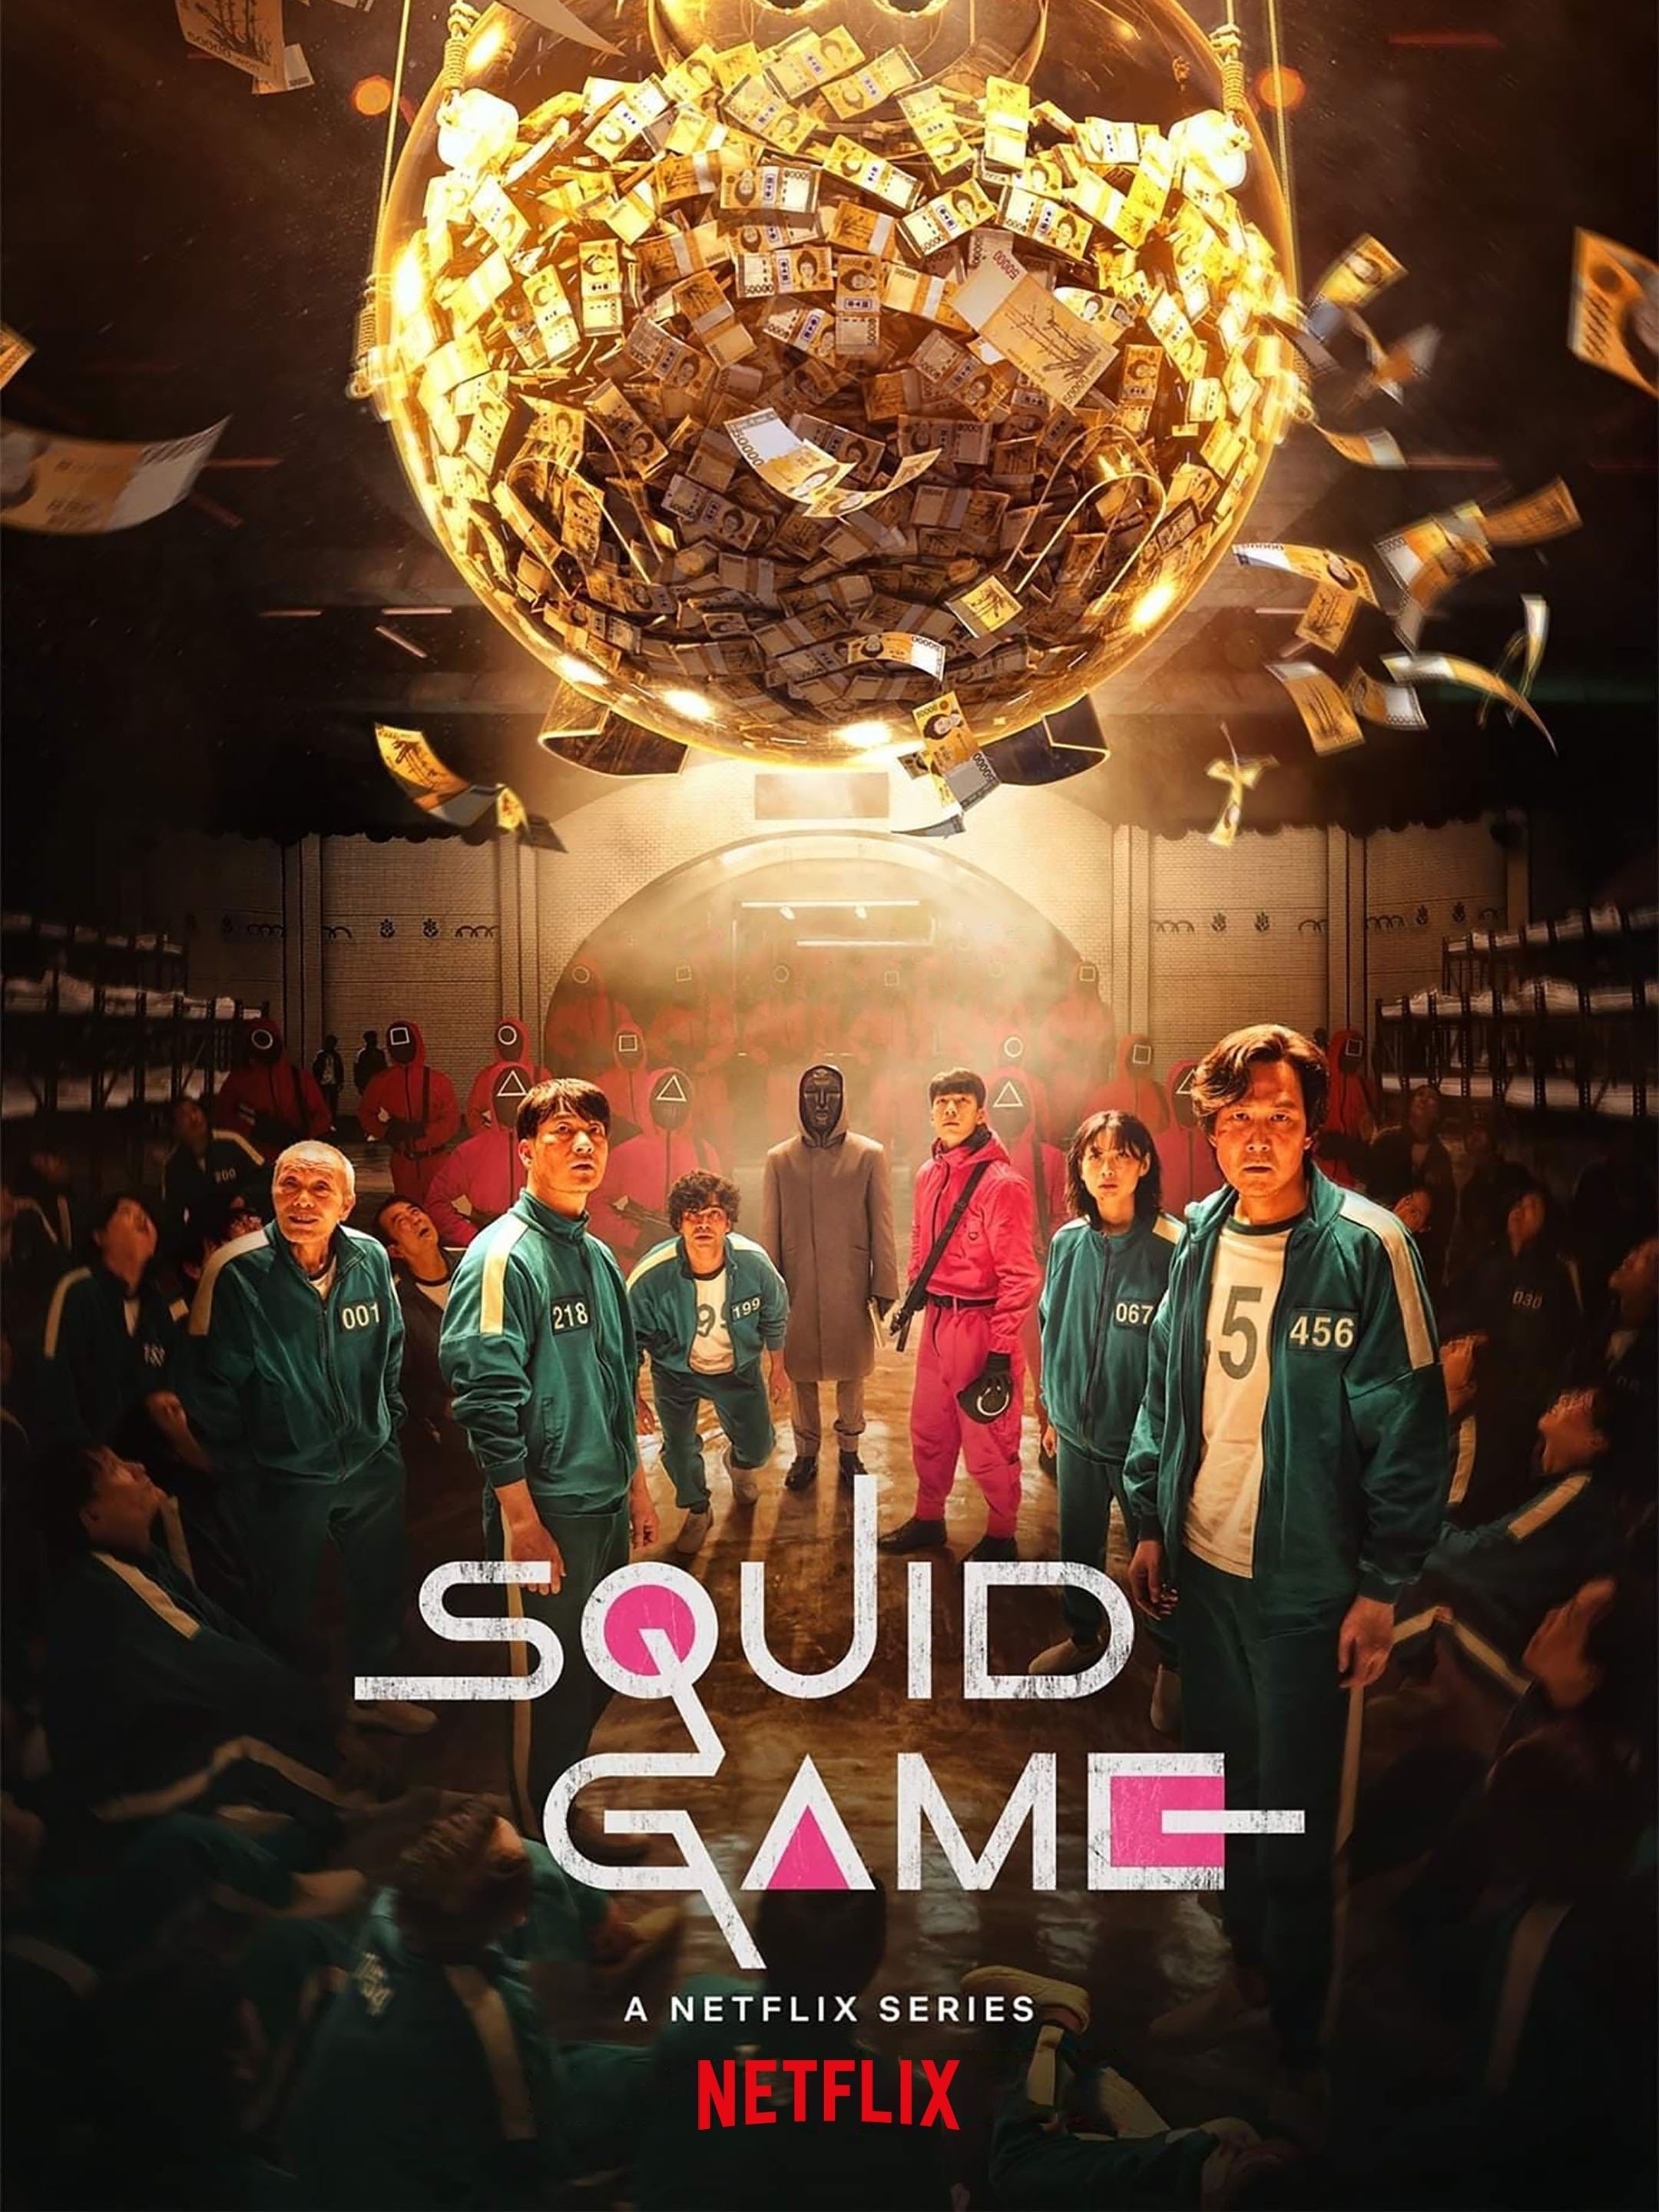 TOMODACHI GAME: Upcoming Thriller Manga Adaptation Is SQUID GAME Between  Friends And Launches This Spring